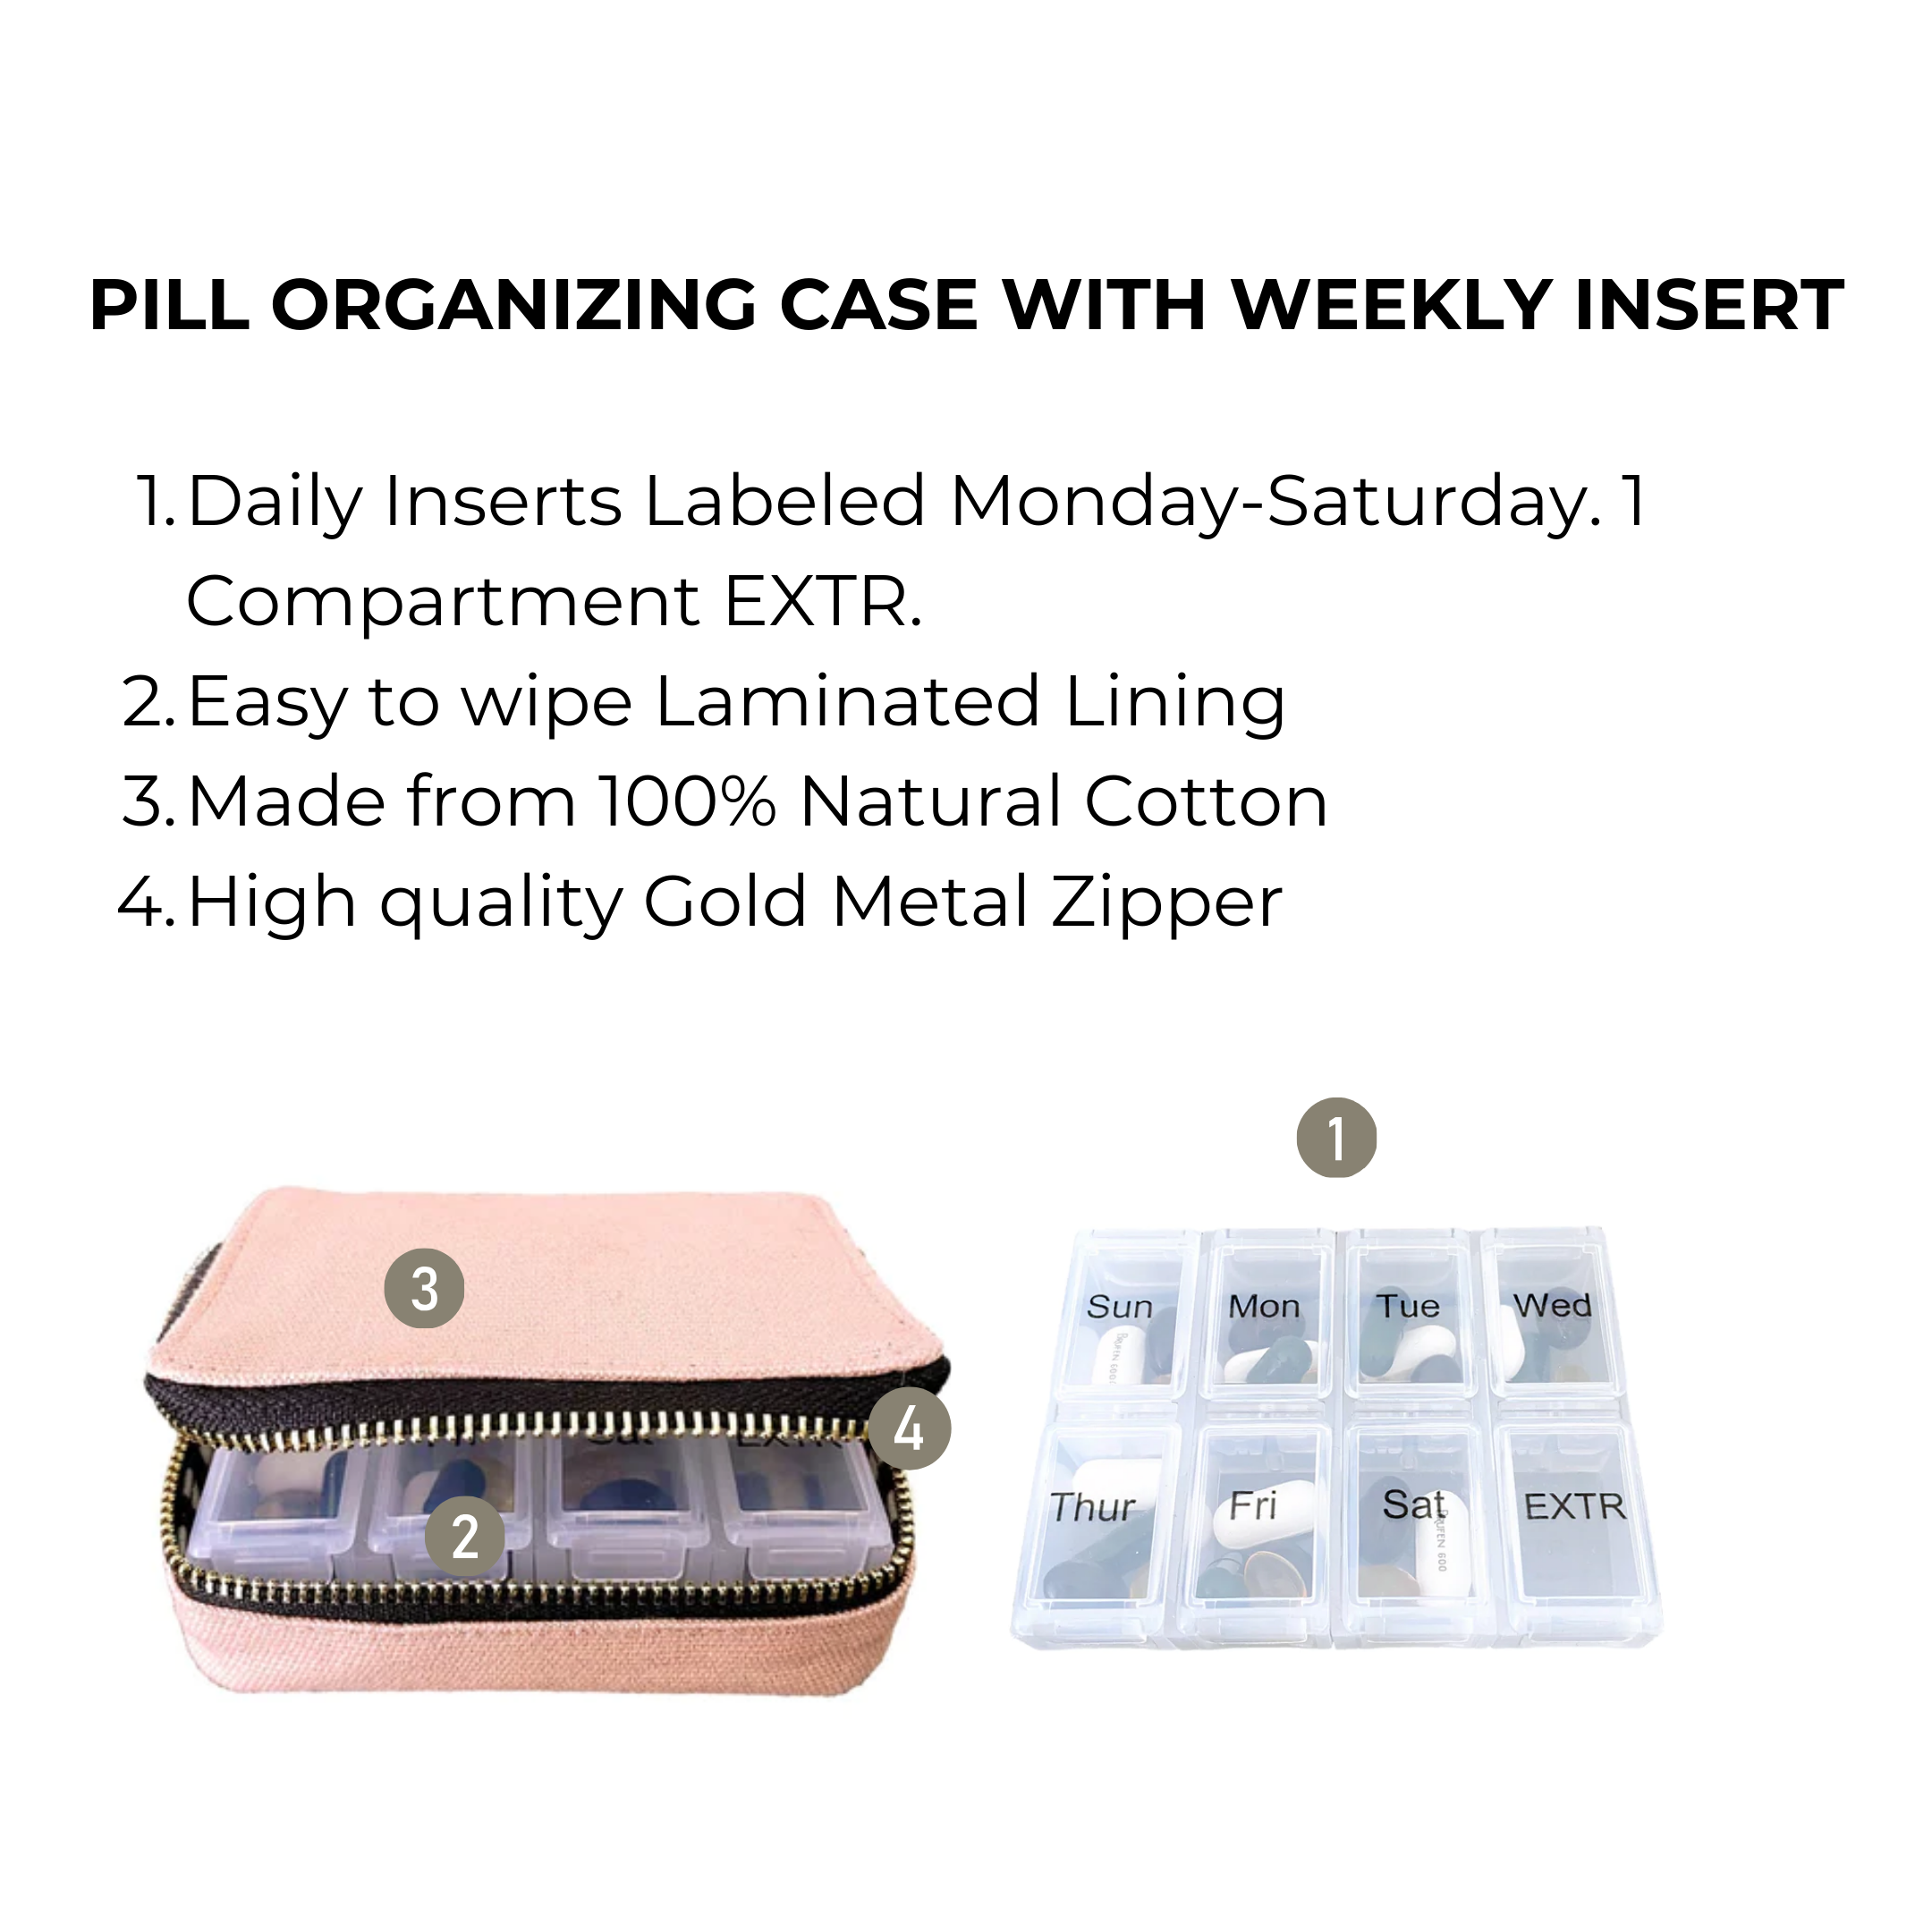 Pill Organizing Case with Weekly Insert, Pink/Blush | Bag-all